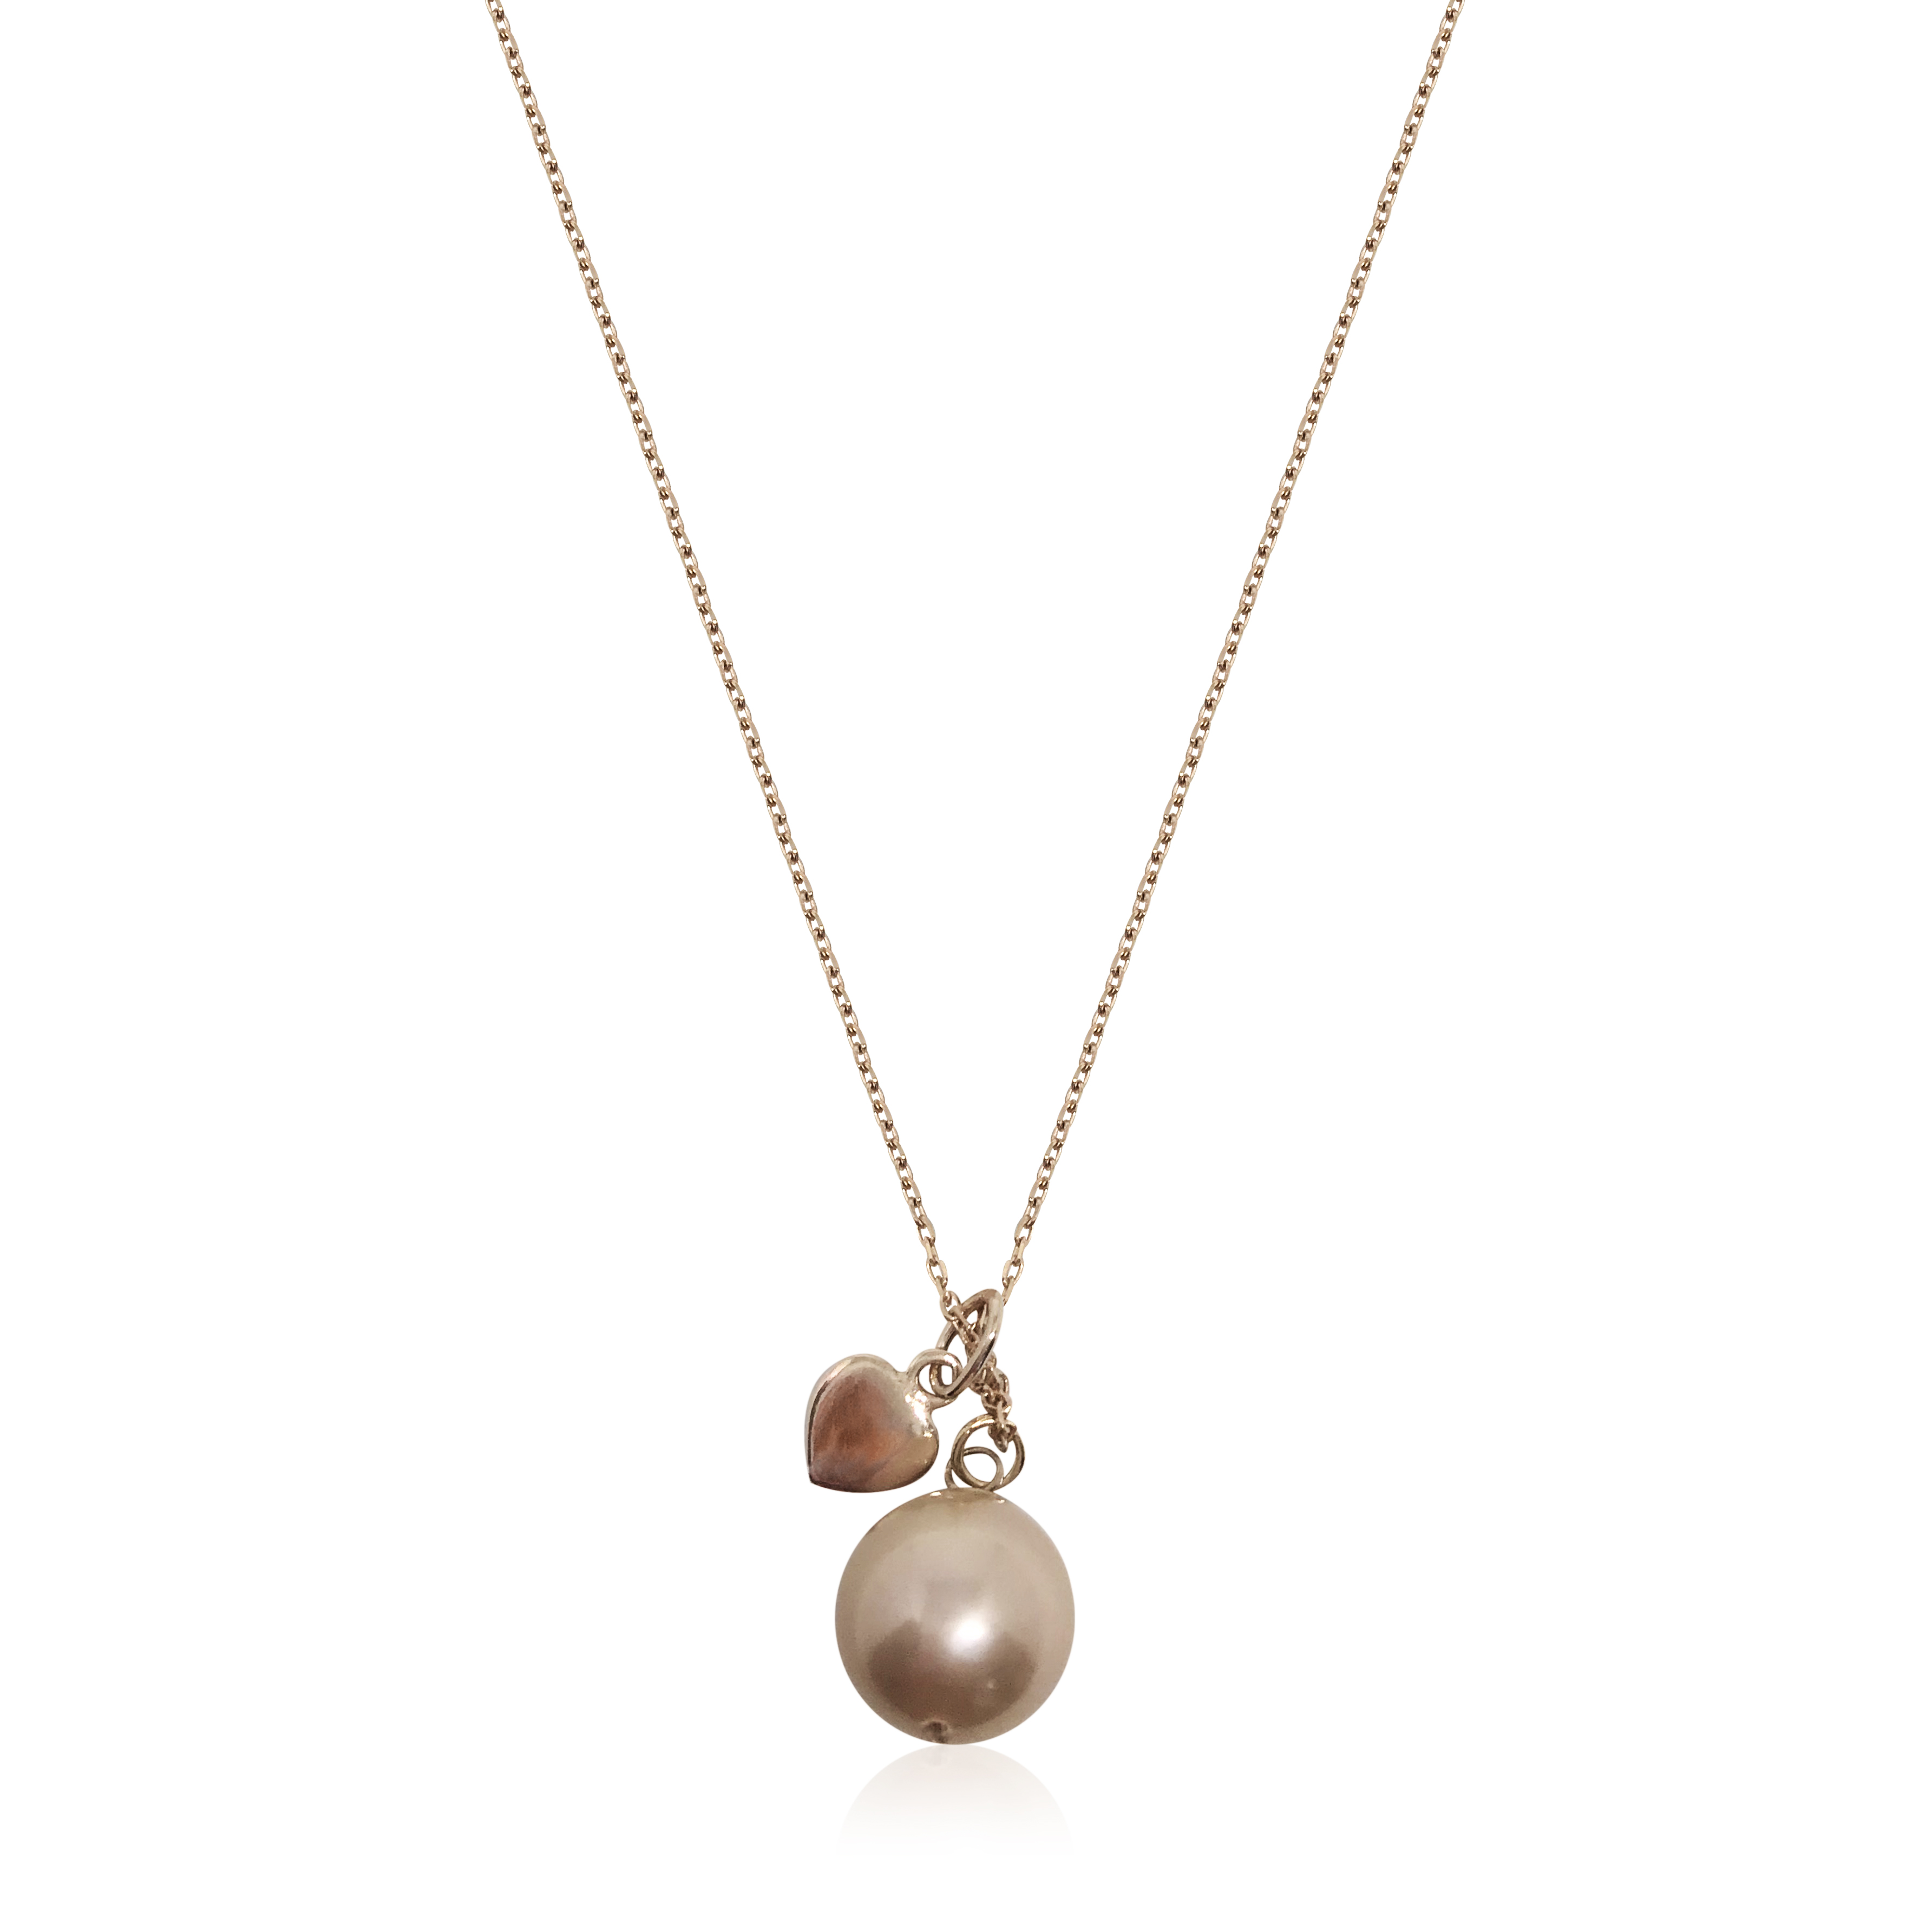 rose hued pearl and heart charm pendant necklace, rose gold